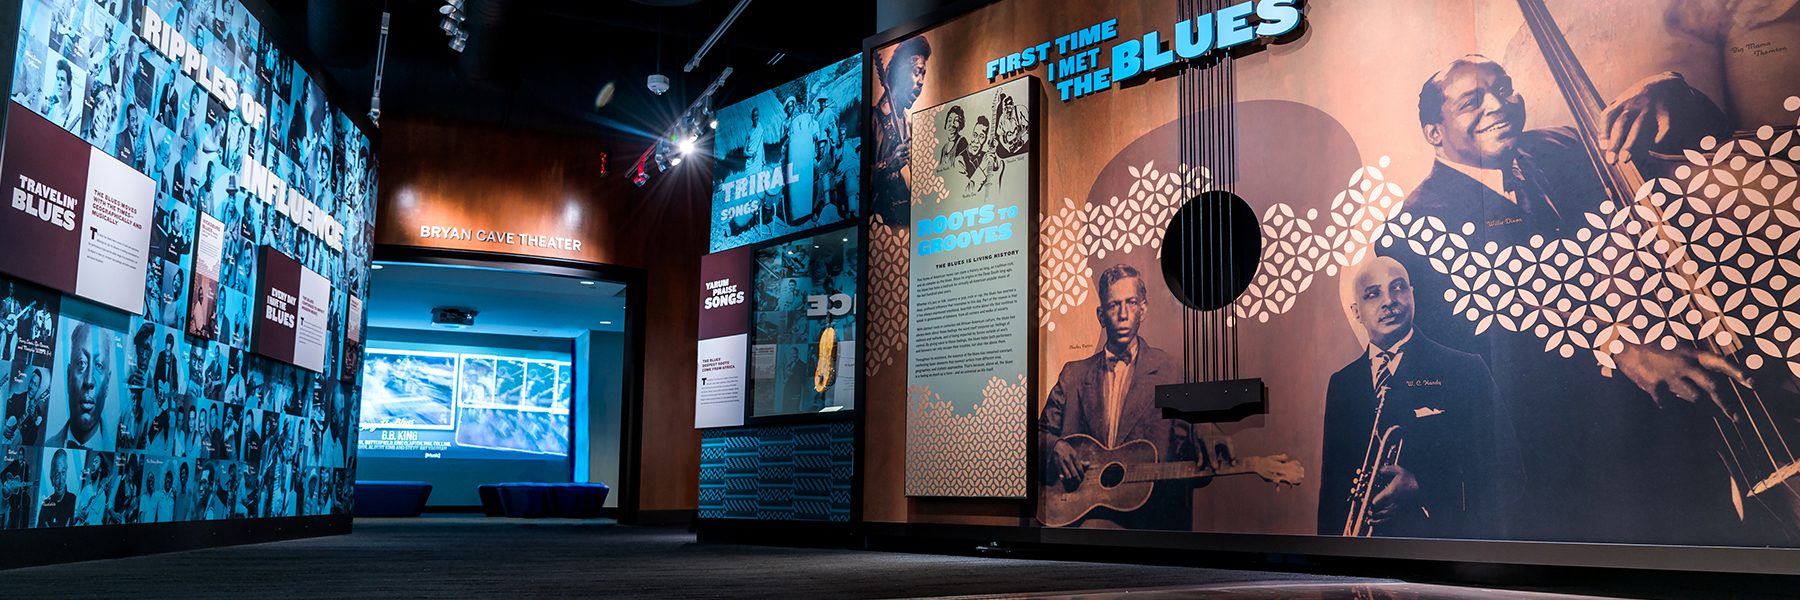 The National Blues Museum in St. Louis, Missouri, part of America's Music Corridor.